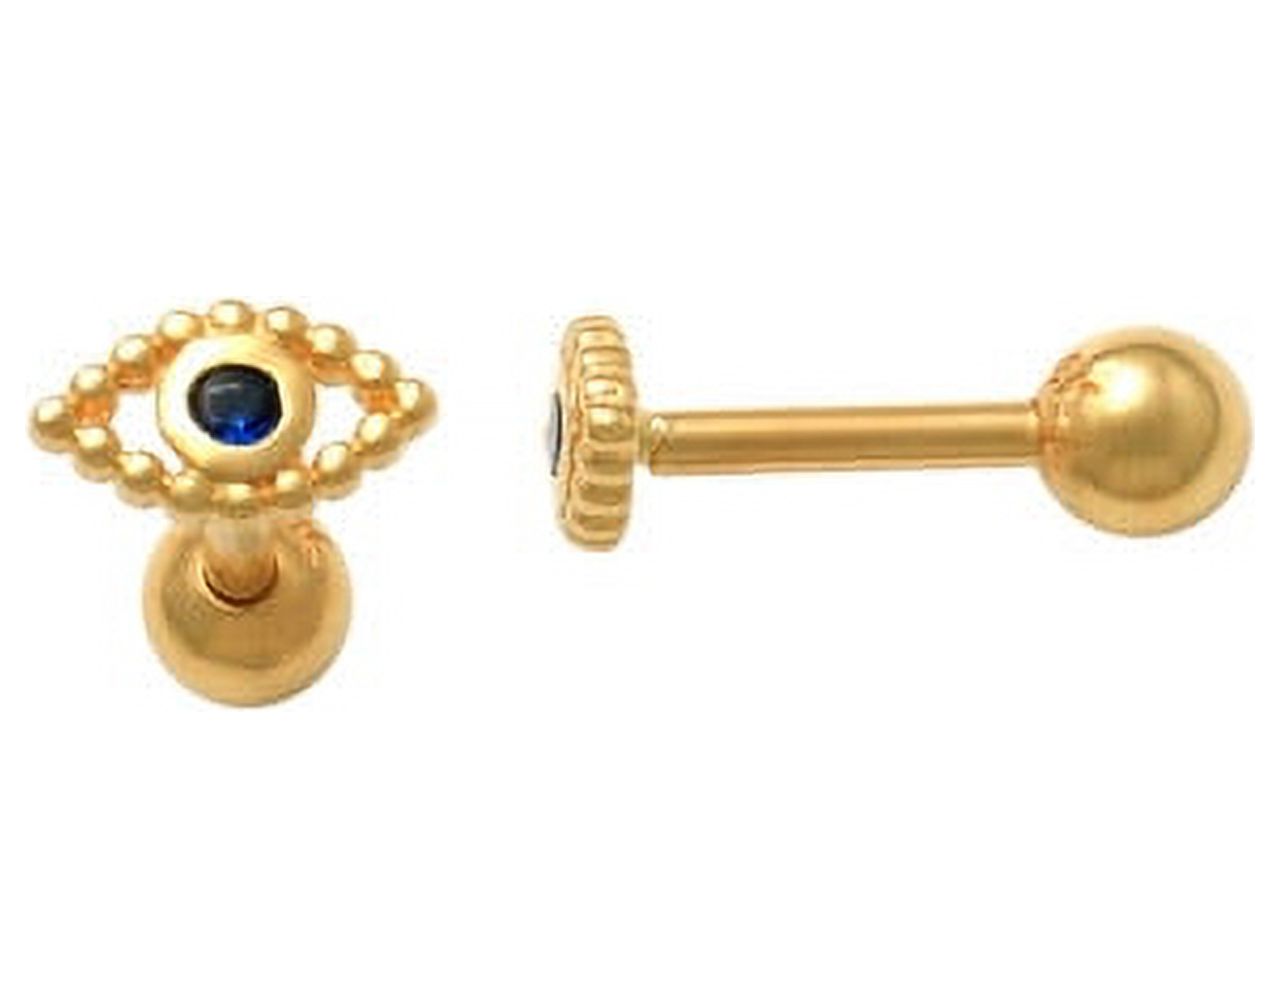 10k Solid Yellow Gold Cartilage Earring in an Evil Eye Design - image 1 of 1